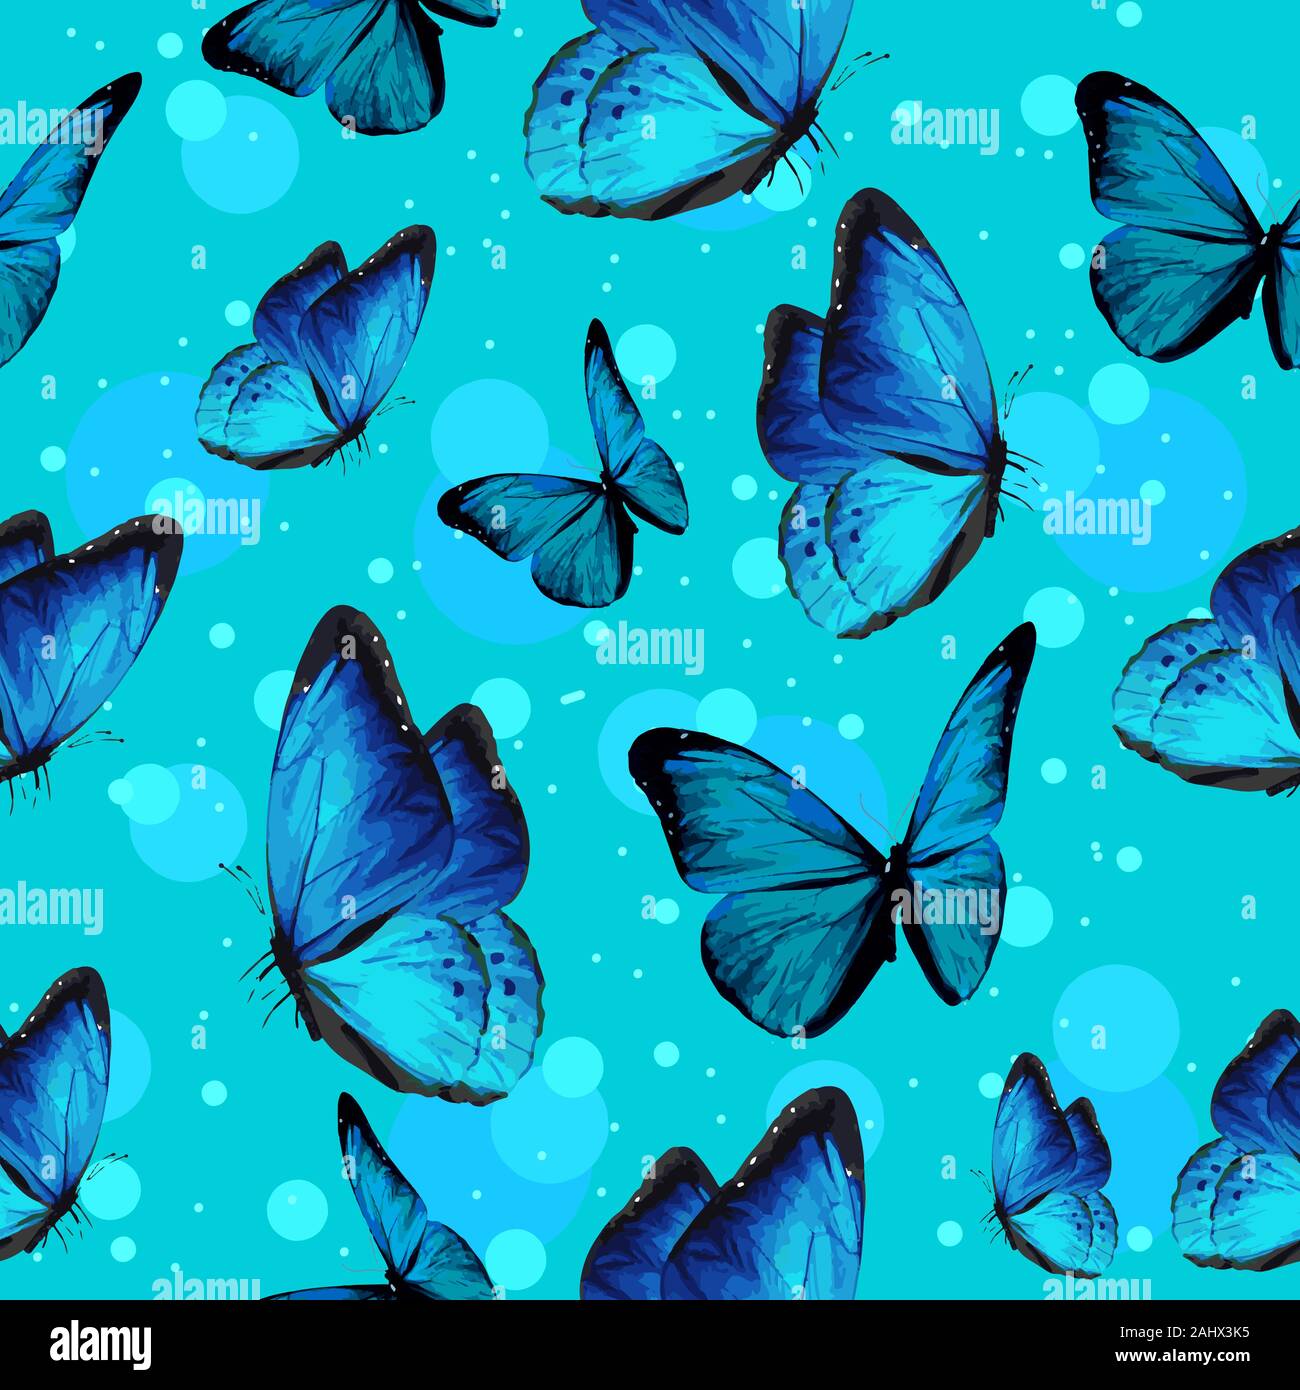 Turquise butterflies and blue bubbles on background flying. Seamless pattern, repetitive pattern for spring and summer insects. Stock Vector